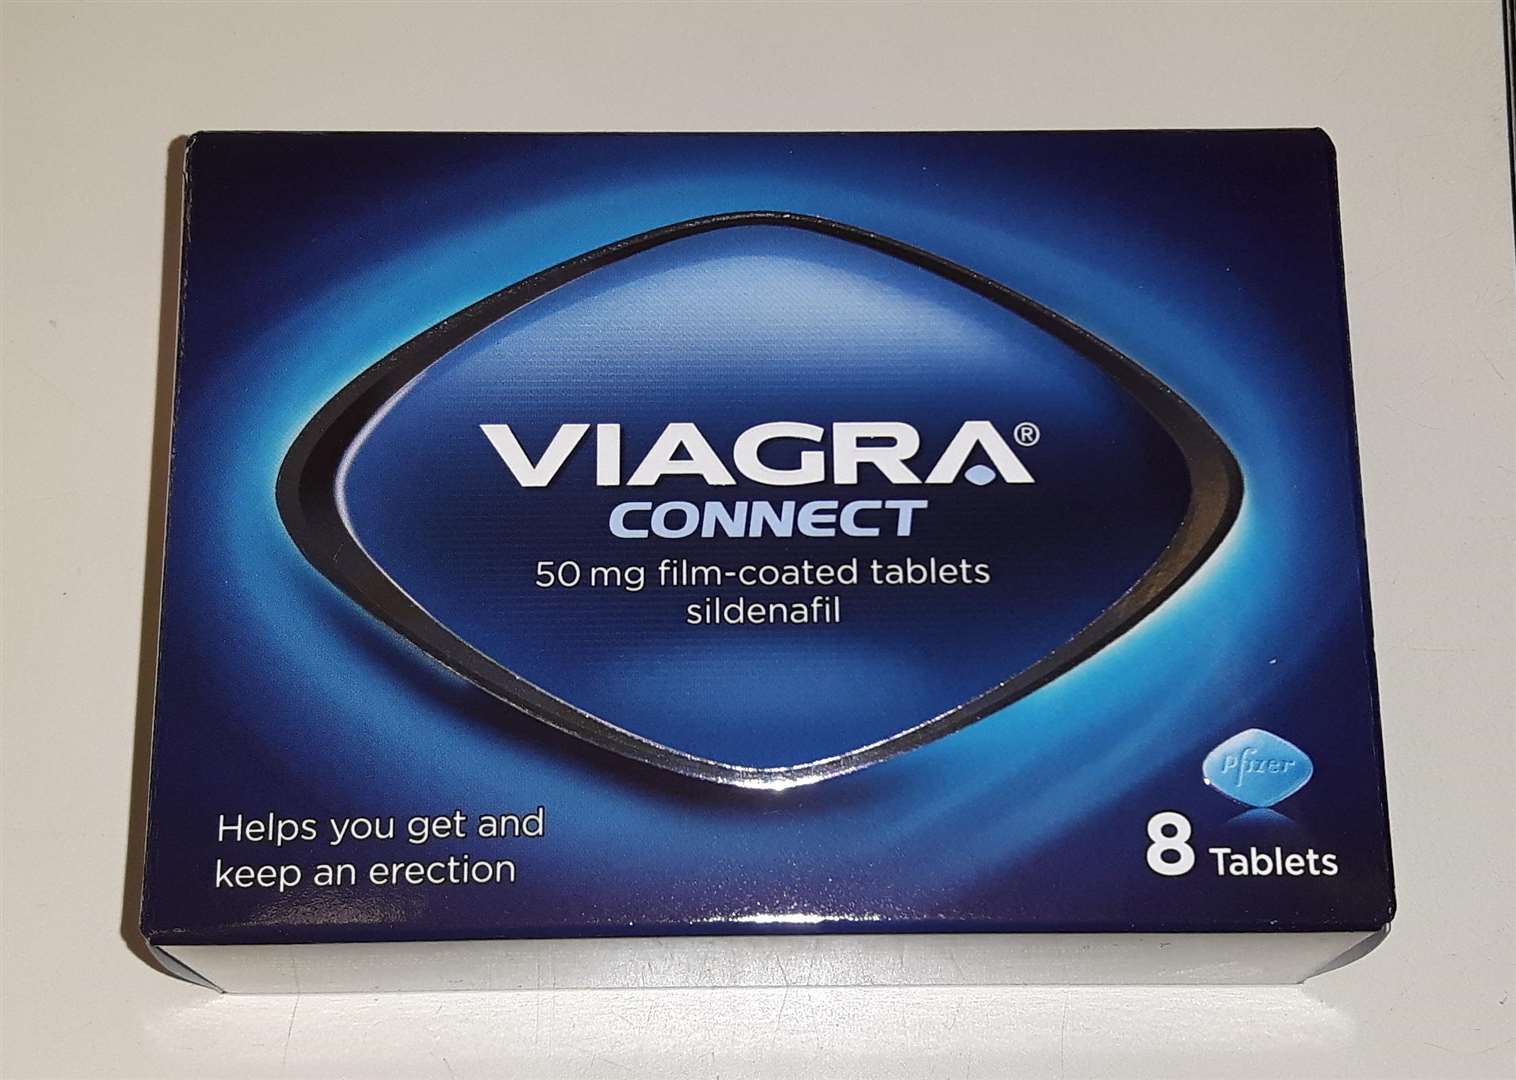 Men no longer need a presciption for Viagra which was discovered by Pfizer in Sandwich (2560171)